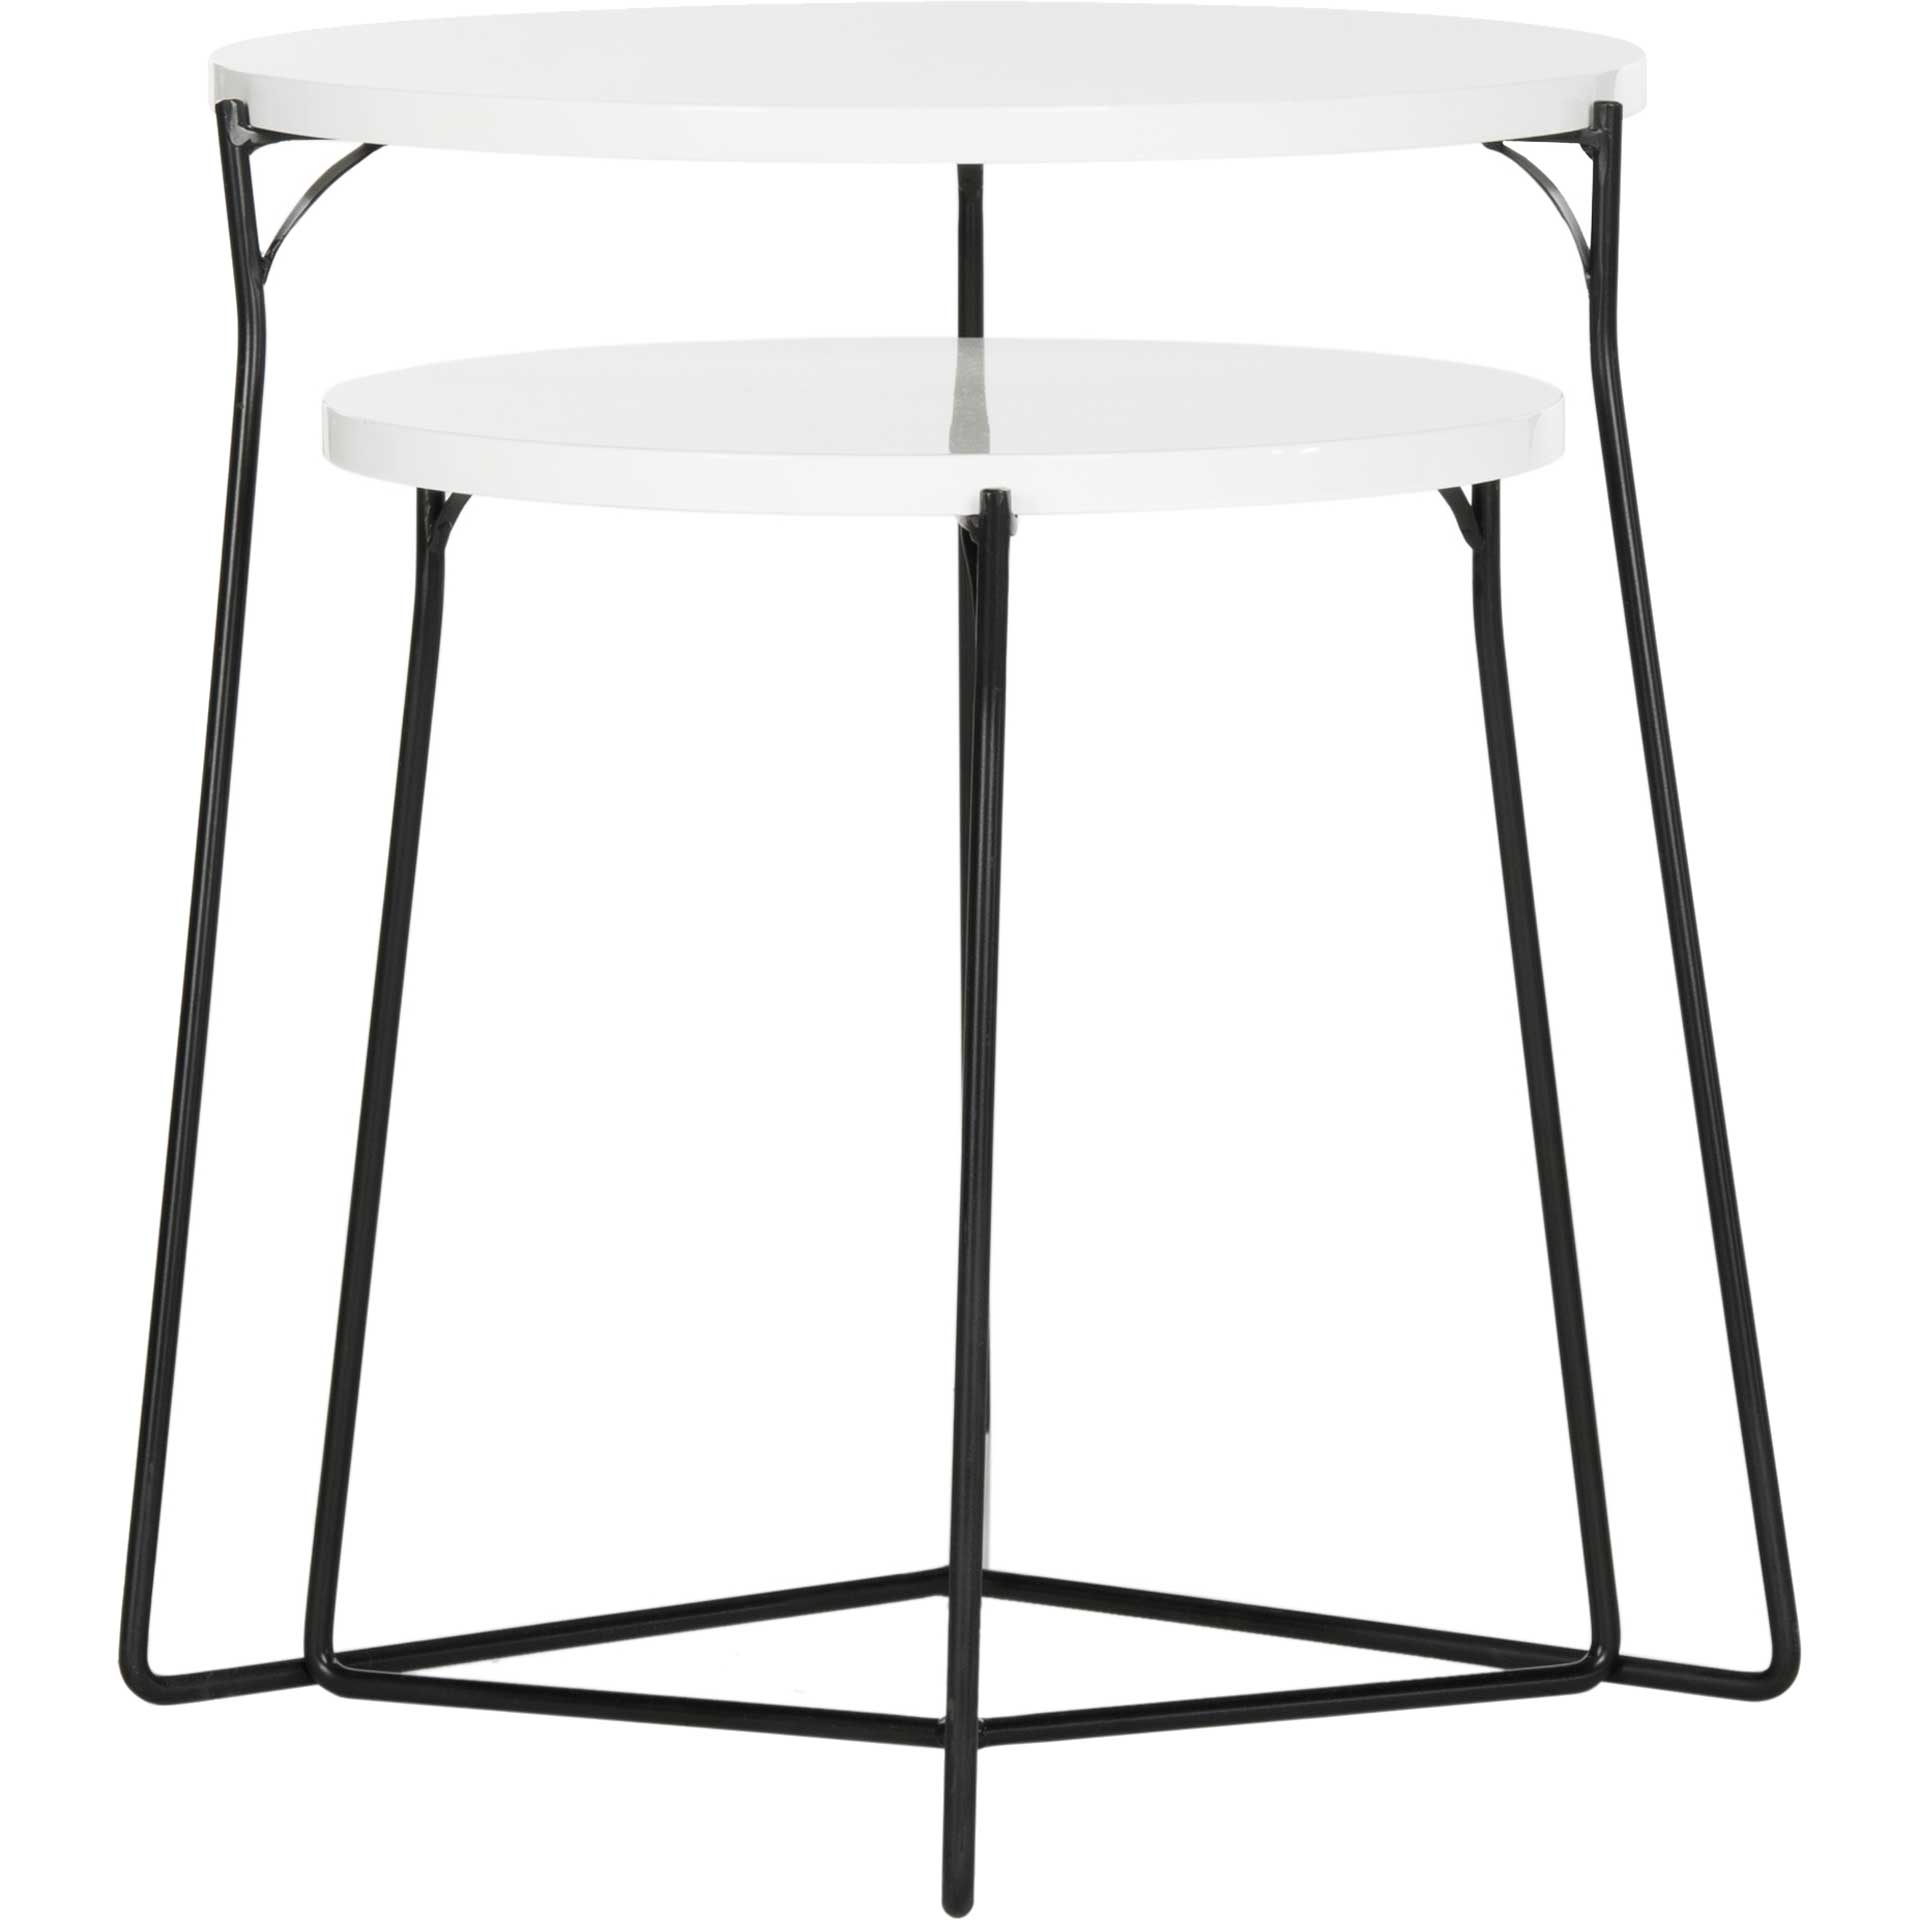 Rylan Lacquer Stacking End Table White/Black